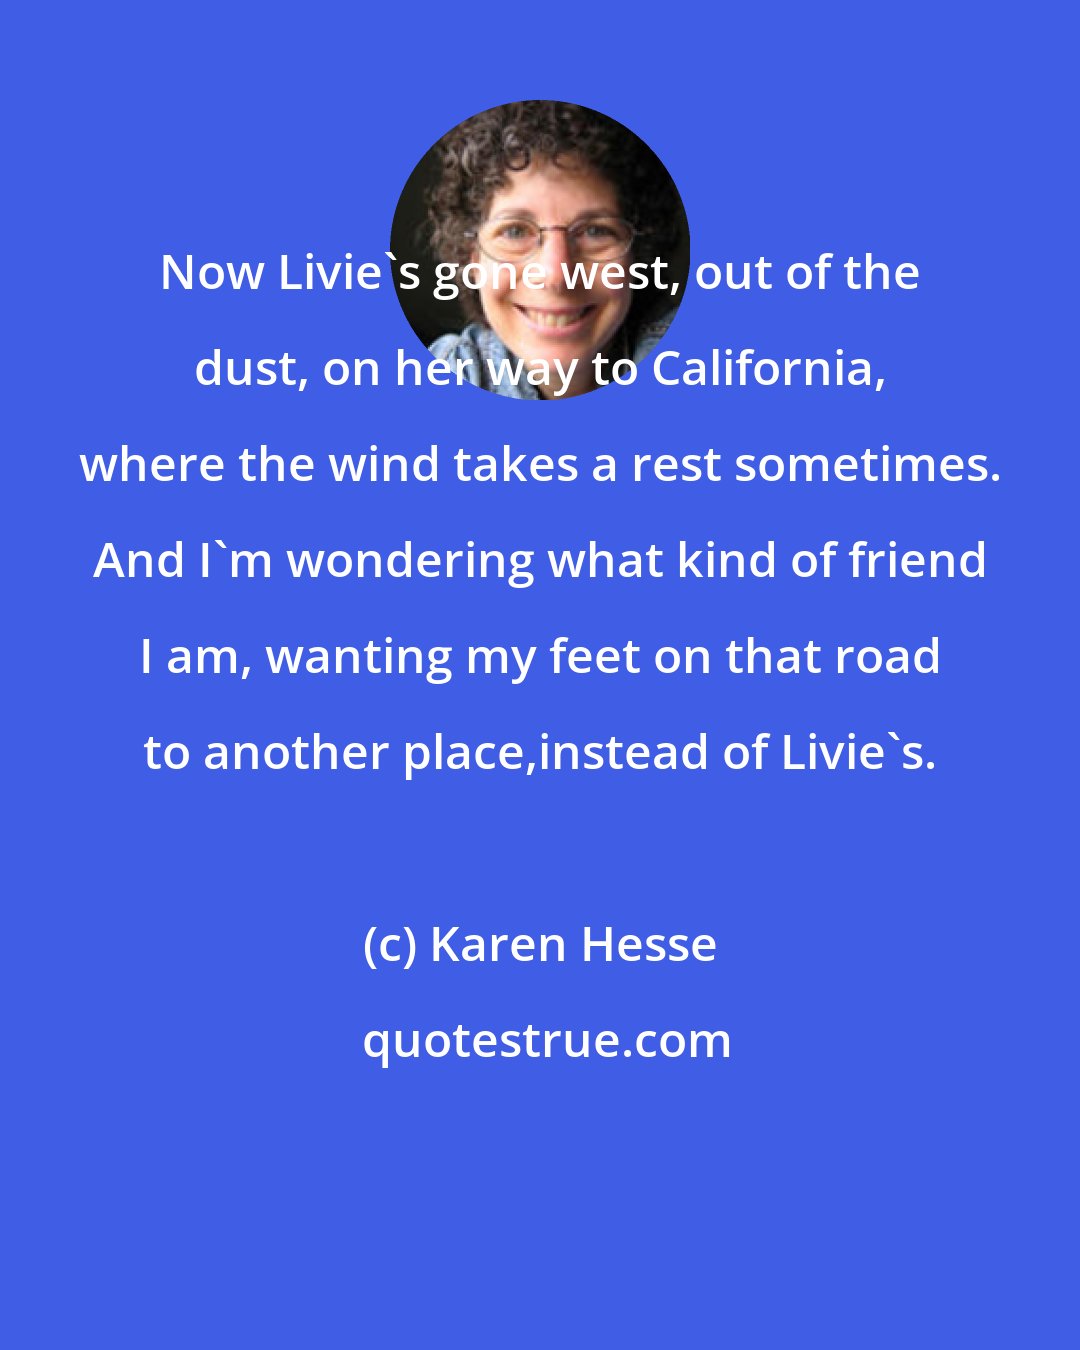 Karen Hesse: Now Livie's gone west, out of the dust, on her way to California, where the wind takes a rest sometimes. And I'm wondering what kind of friend I am, wanting my feet on that road to another place,instead of Livie's.